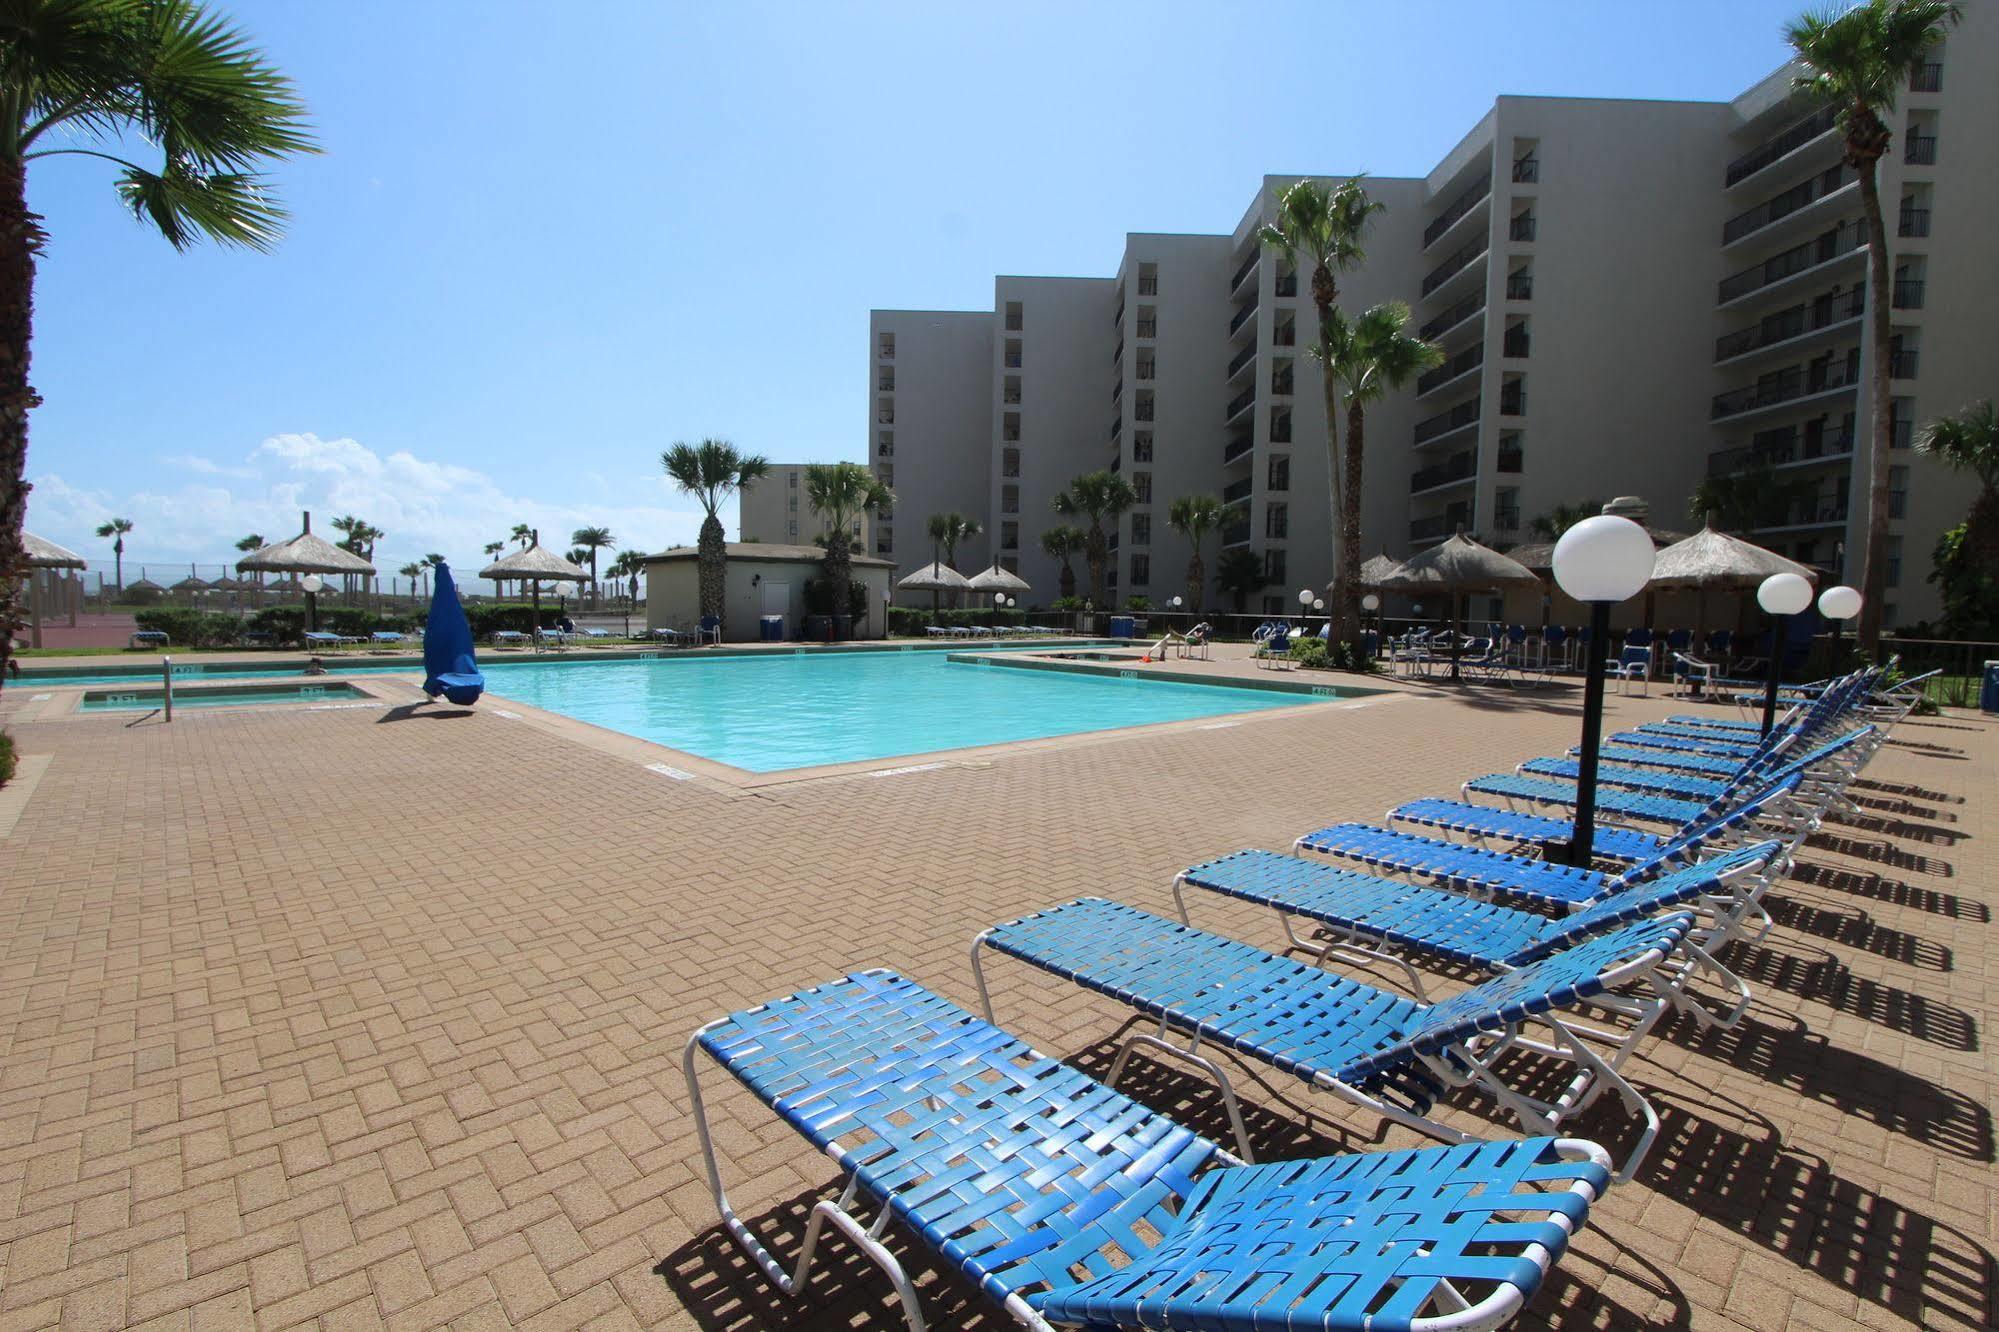 HOTEL ROYALE BEACH AND TENNIS CLUB, A VRI RESORT SOUTH PADRE ISLAND, TX 4*  (United States) - from US$ 152 | BOOKED